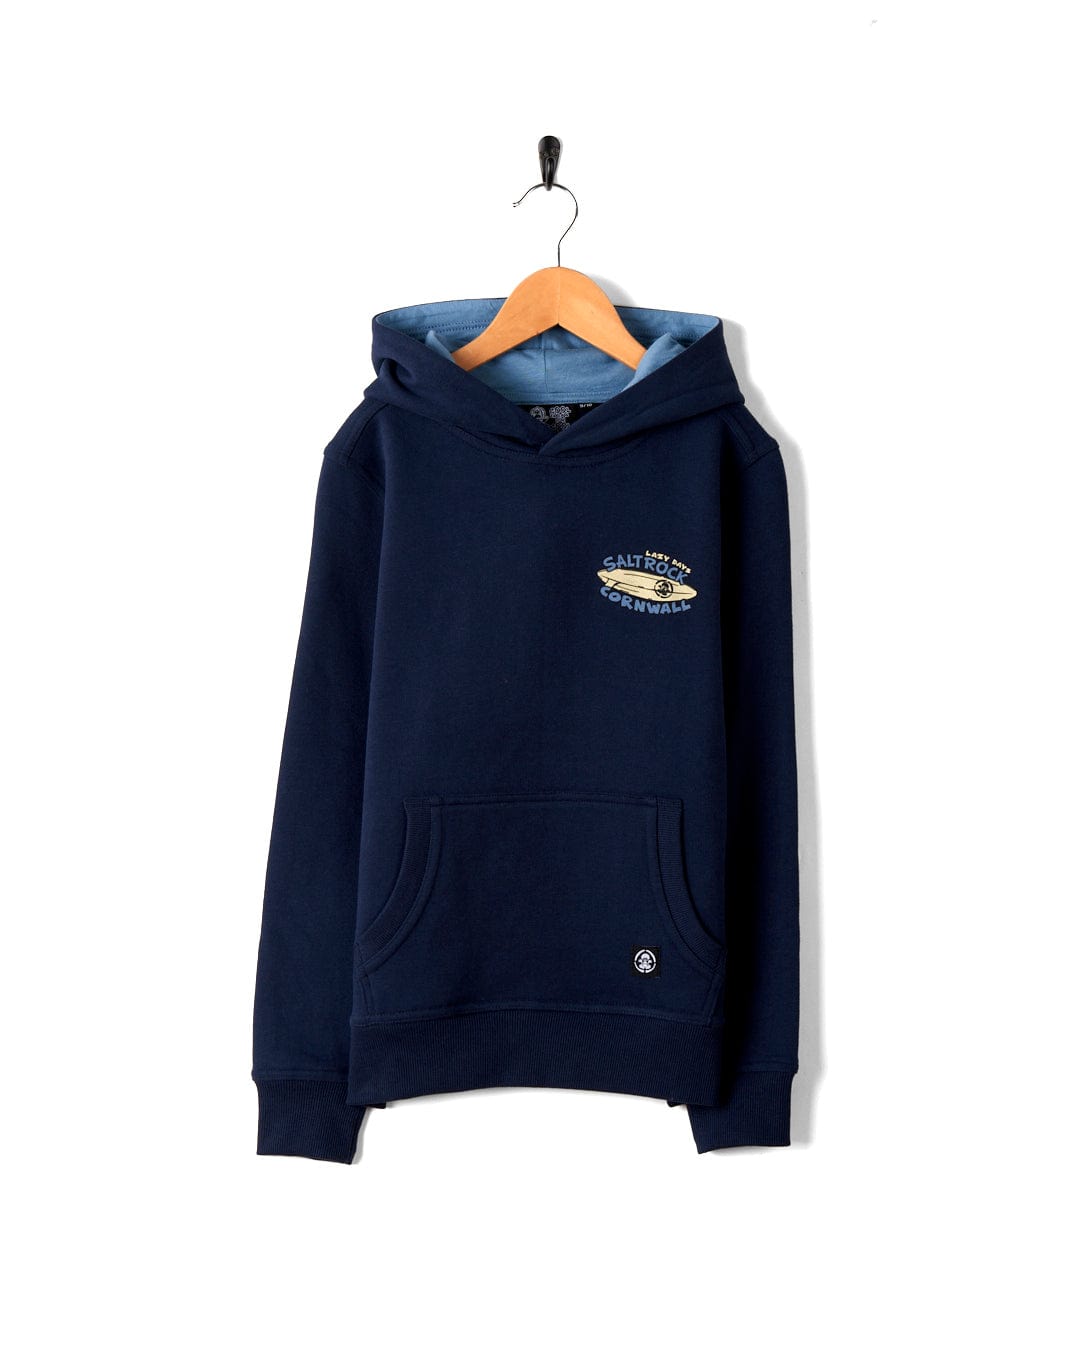 A Lazy Location Cornwall - Recycled Kids Hoodie - Blue with a front pocket and a hood, hanging on a hanger against a white background. The hoodie has a small Saltrock branded logo on the chest.